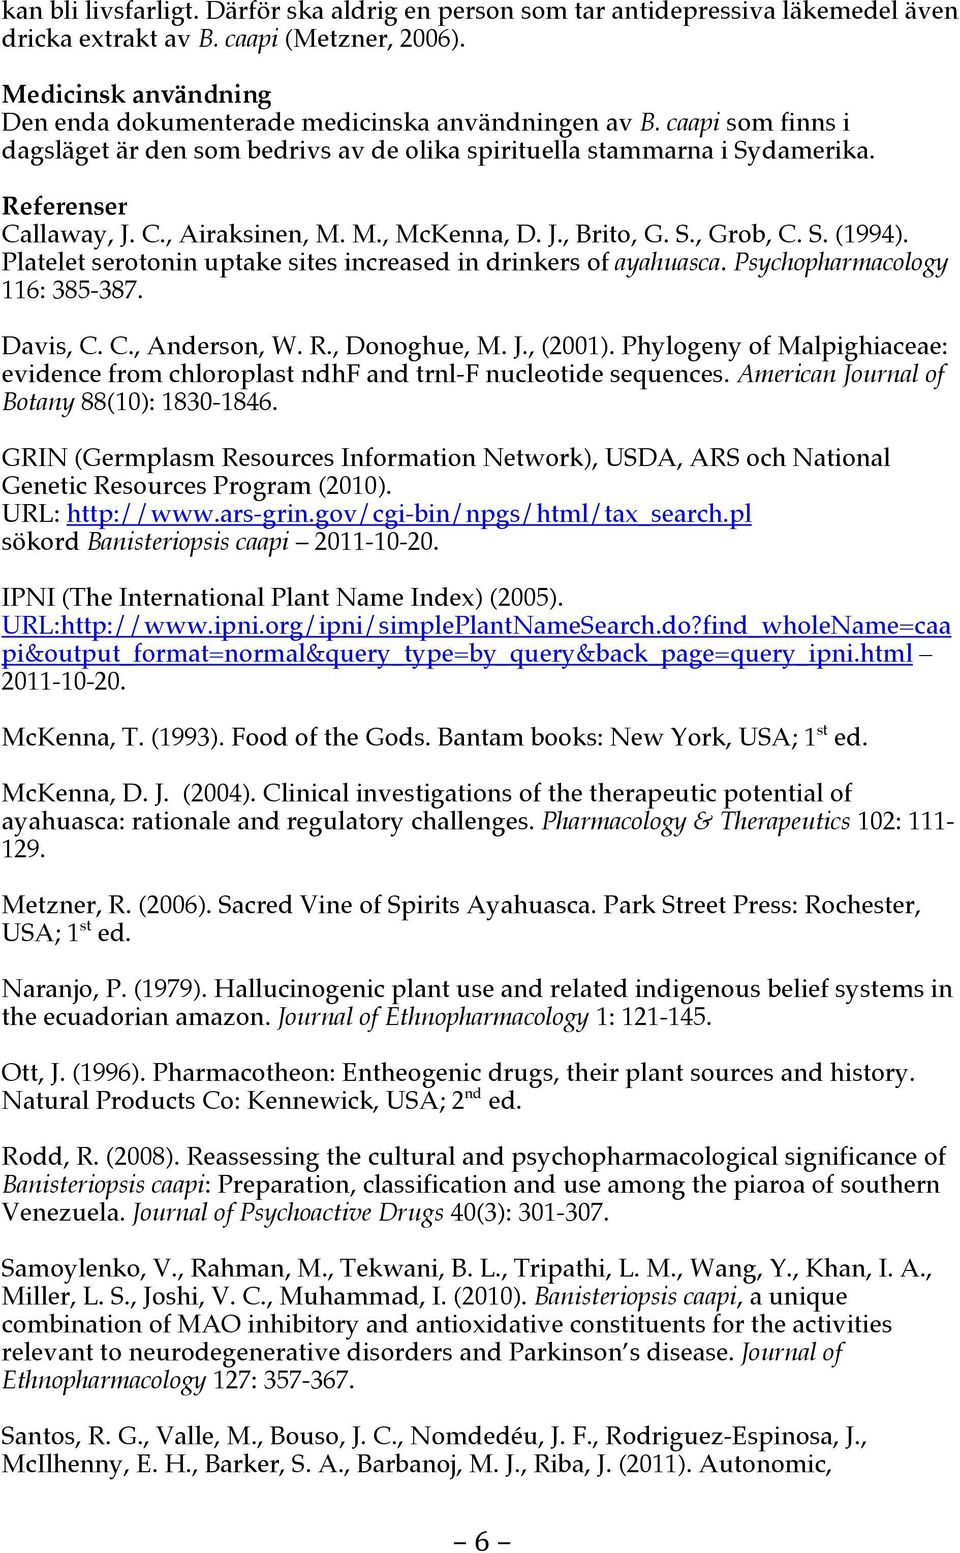 M., McKenna, D. J., Brito, G. S., Grob, C. S. (1994). Platelet serotonin uptake sites increased in drinkers of ayahuasca. Psychopharmacology 116: 385-387. Davis, C. C., Anderson, W. R., Donoghue, M.